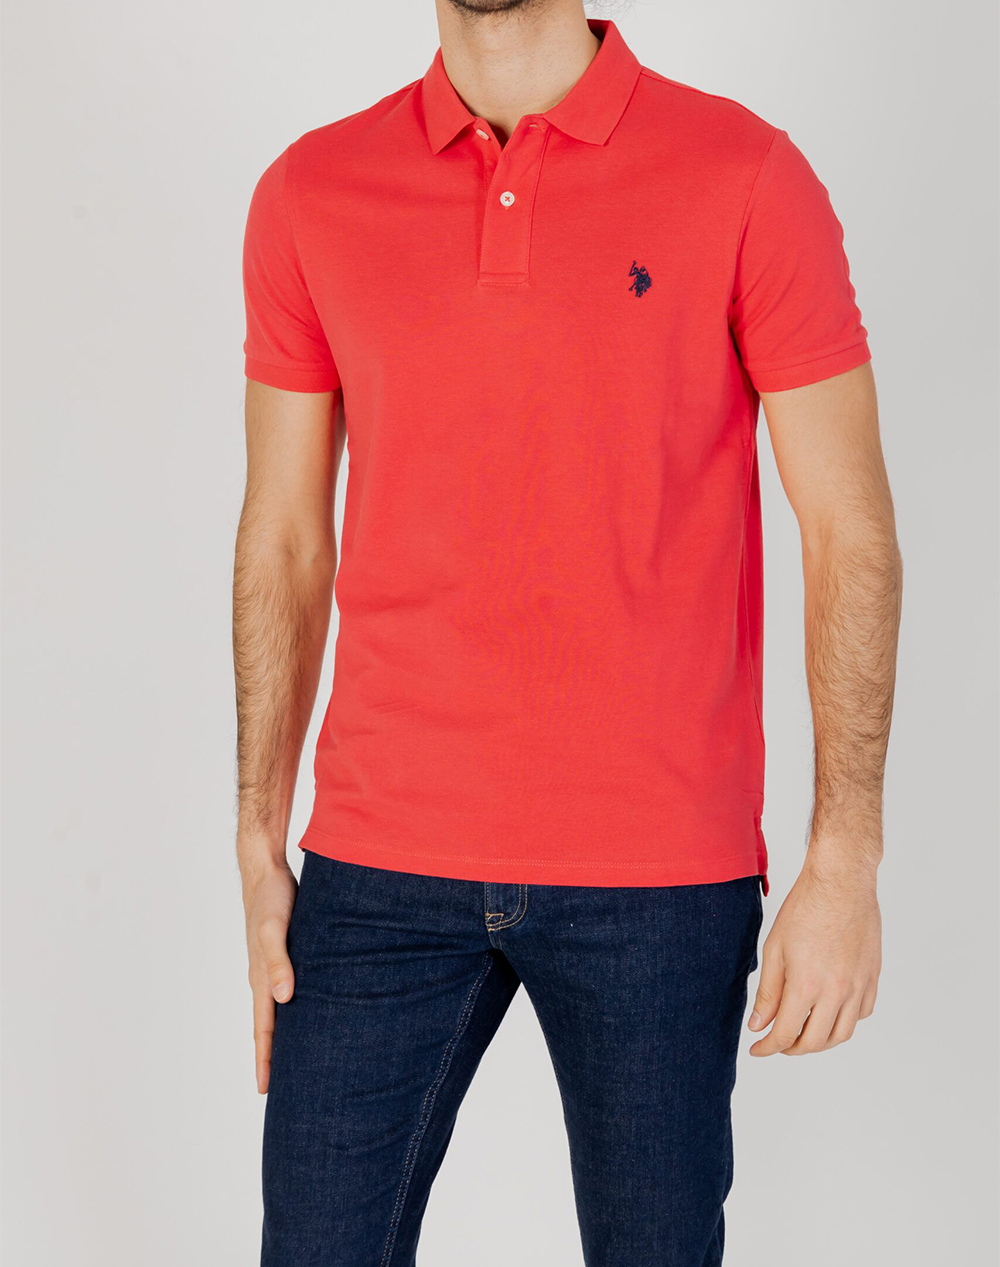 US POLO ASSN KING 41029 EHPD POLO PACK OF 400 ΜΠΛΟΥΖΑ ΑΝΔΡΙΚΟ 6735541029P400-352 OrangeRed